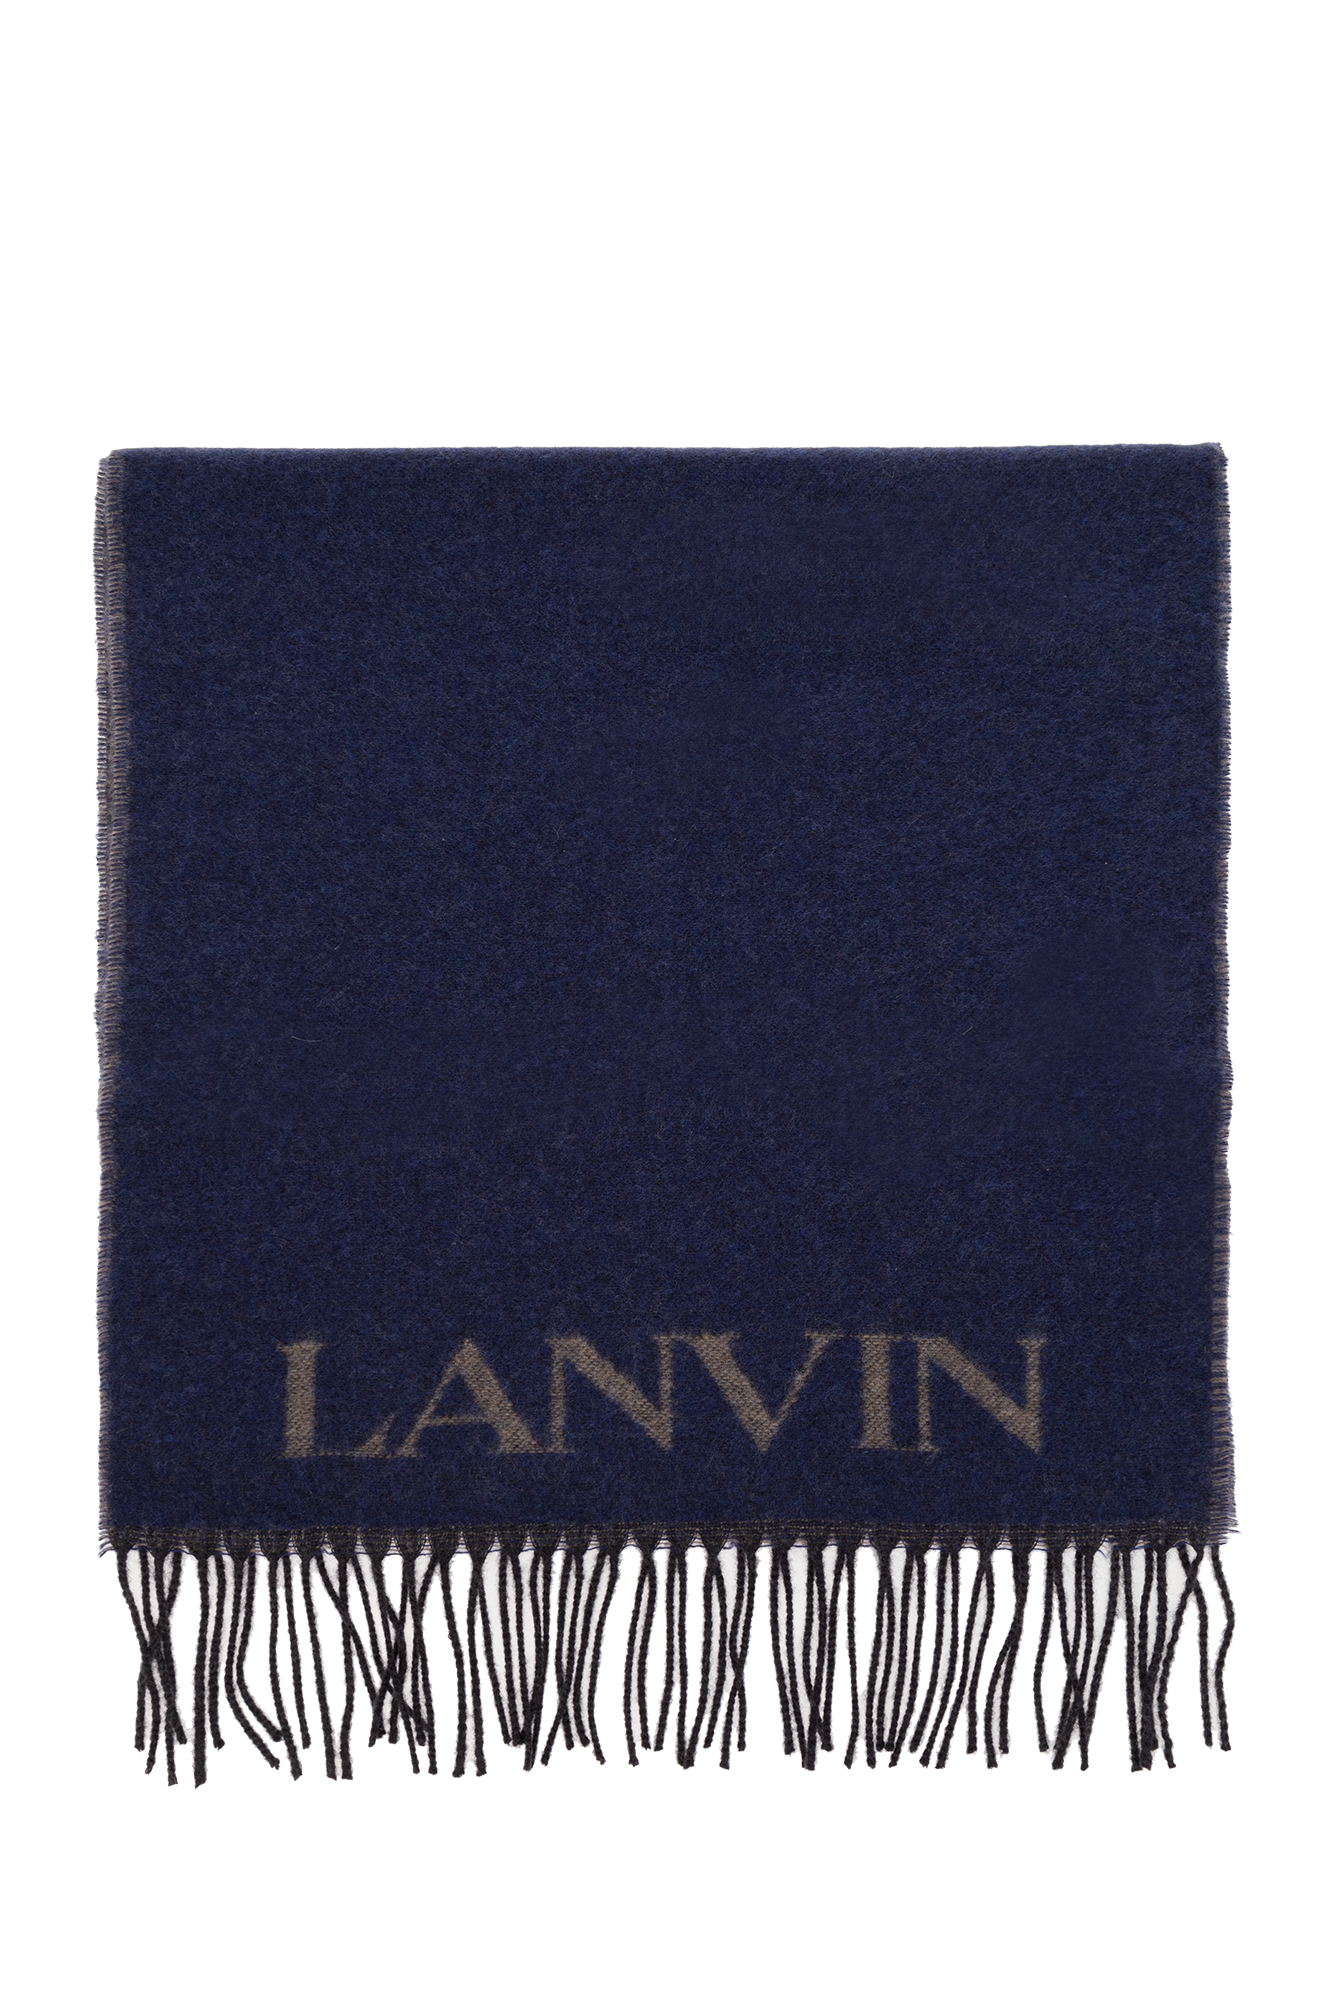 Lanvin Lets keep in touch